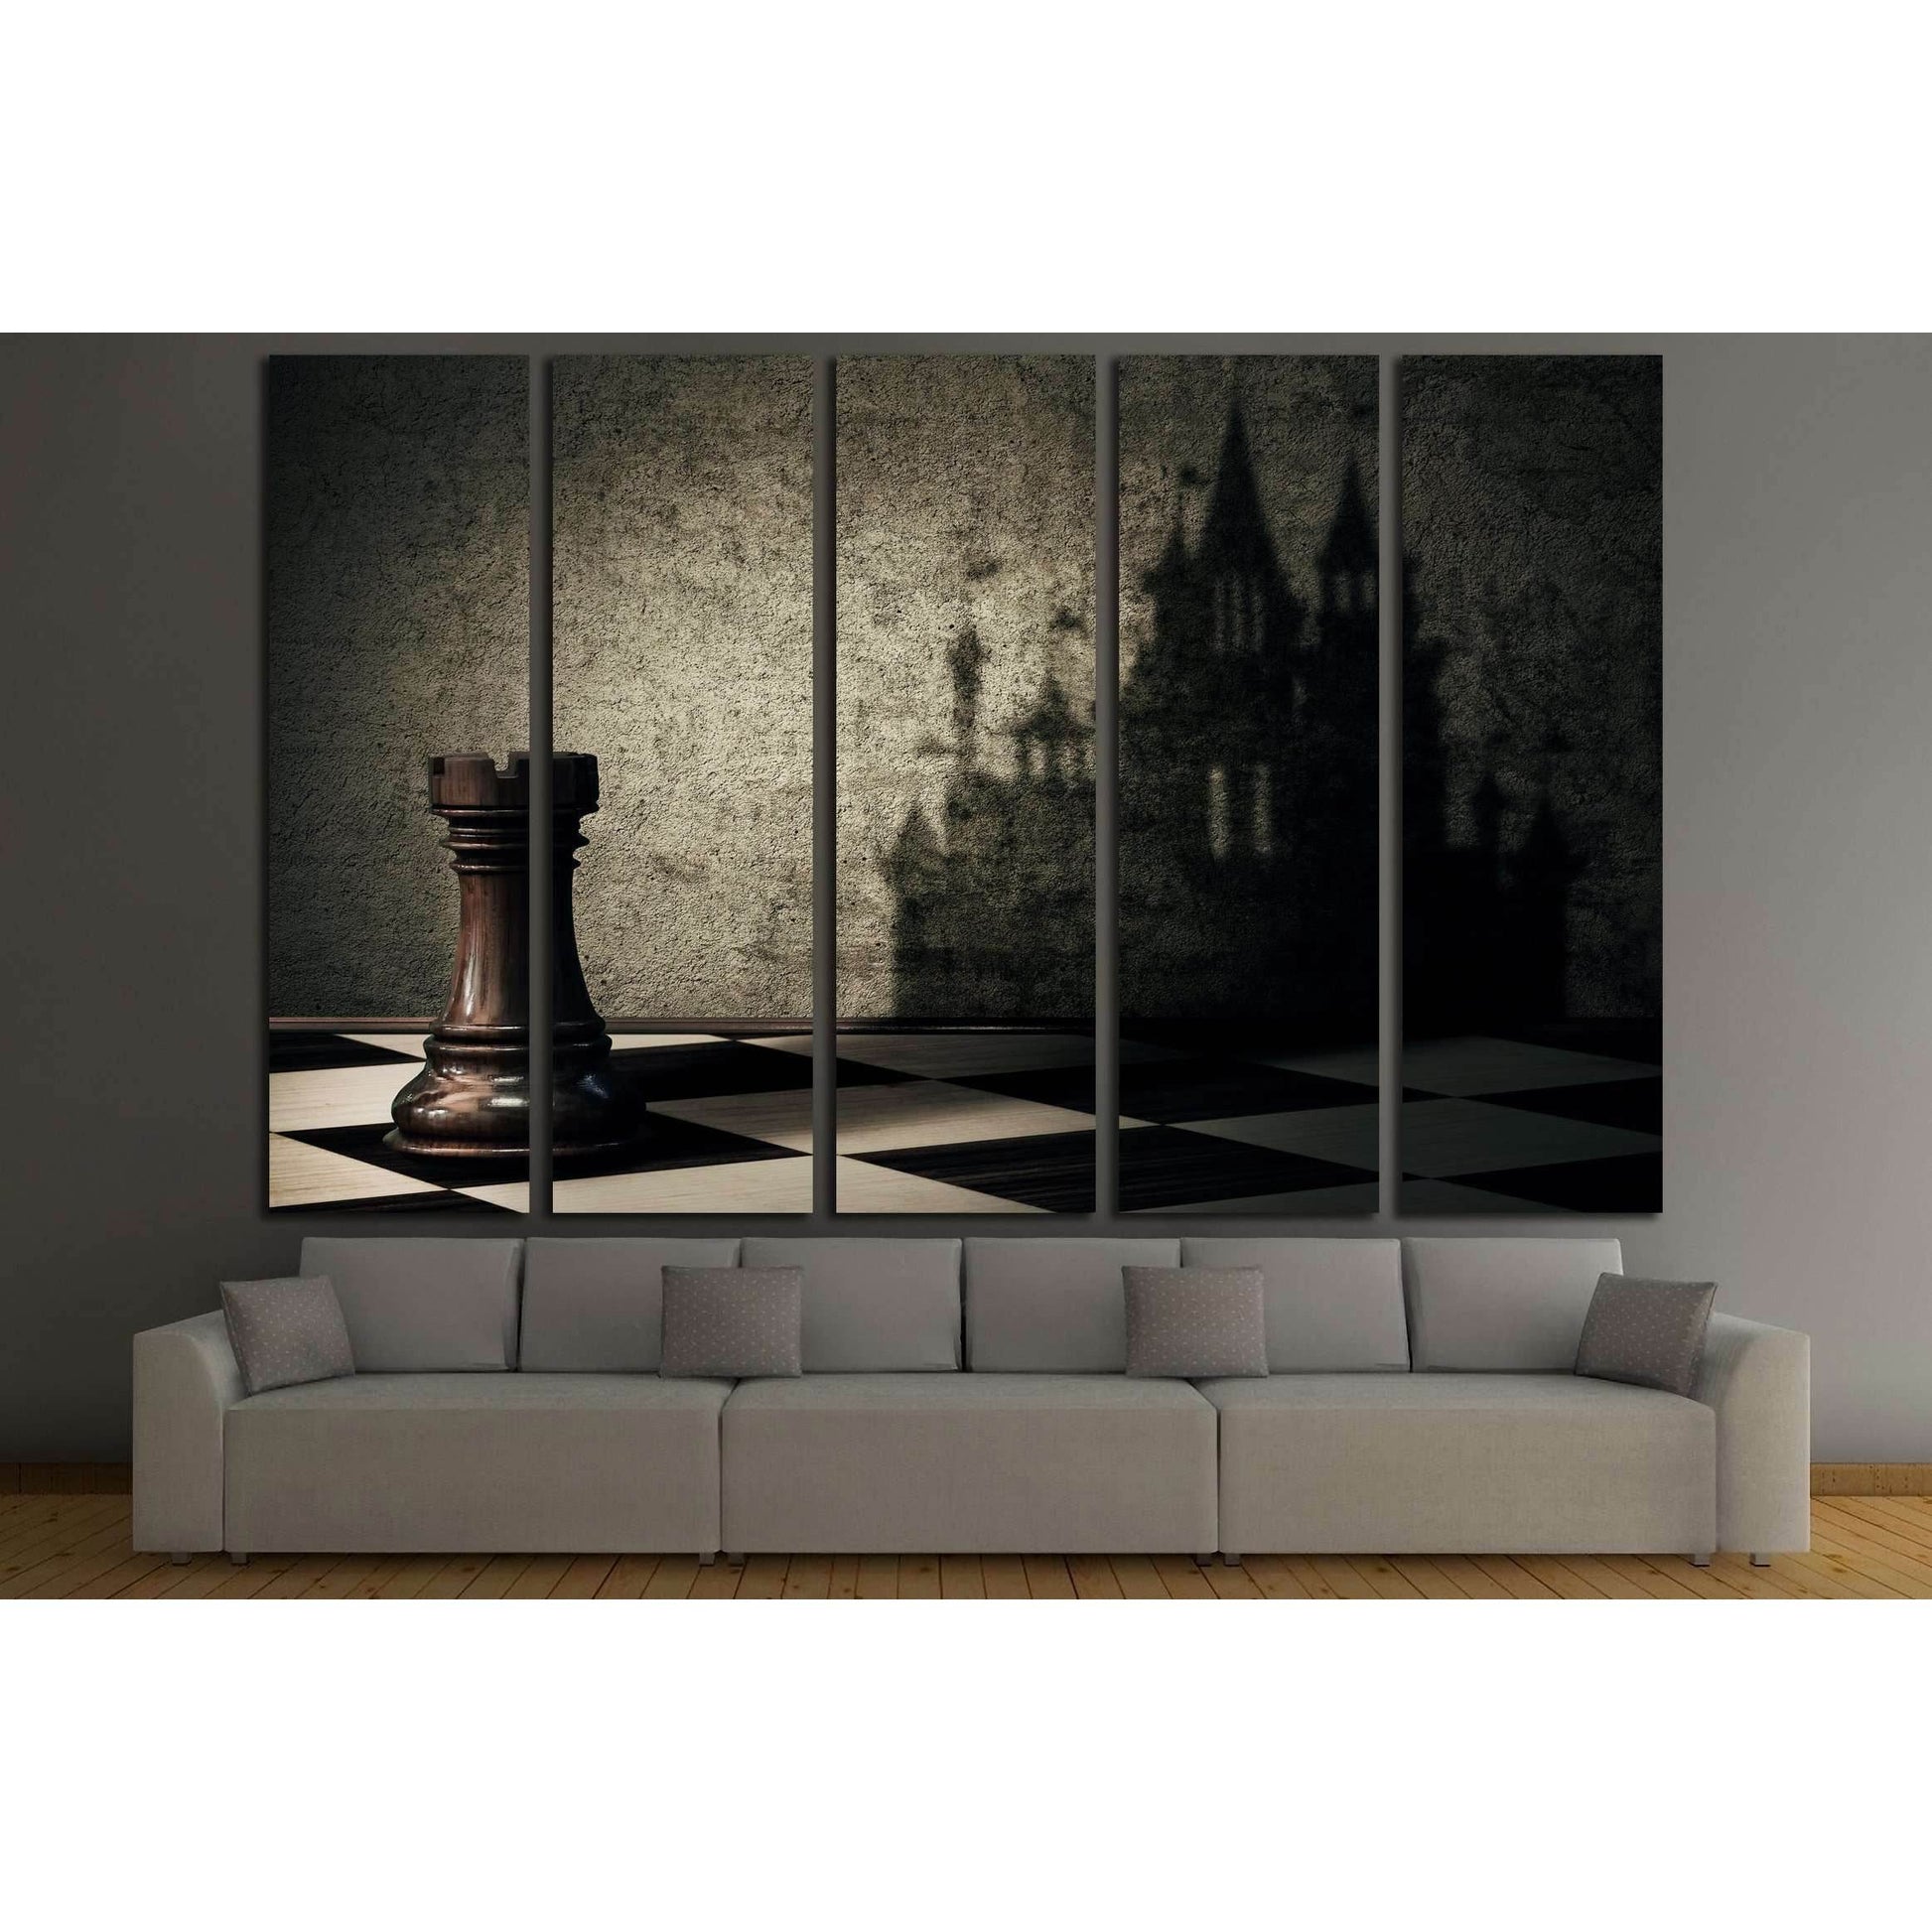 Chess Themed Wall Art Canvas PrintDecorate your walls with a stunning Chess Themed Canvas Art Print from the world's largest art gallery. Choose from thousands of Chess artworks with various sizing options. Choose your perfect art print to complete your h